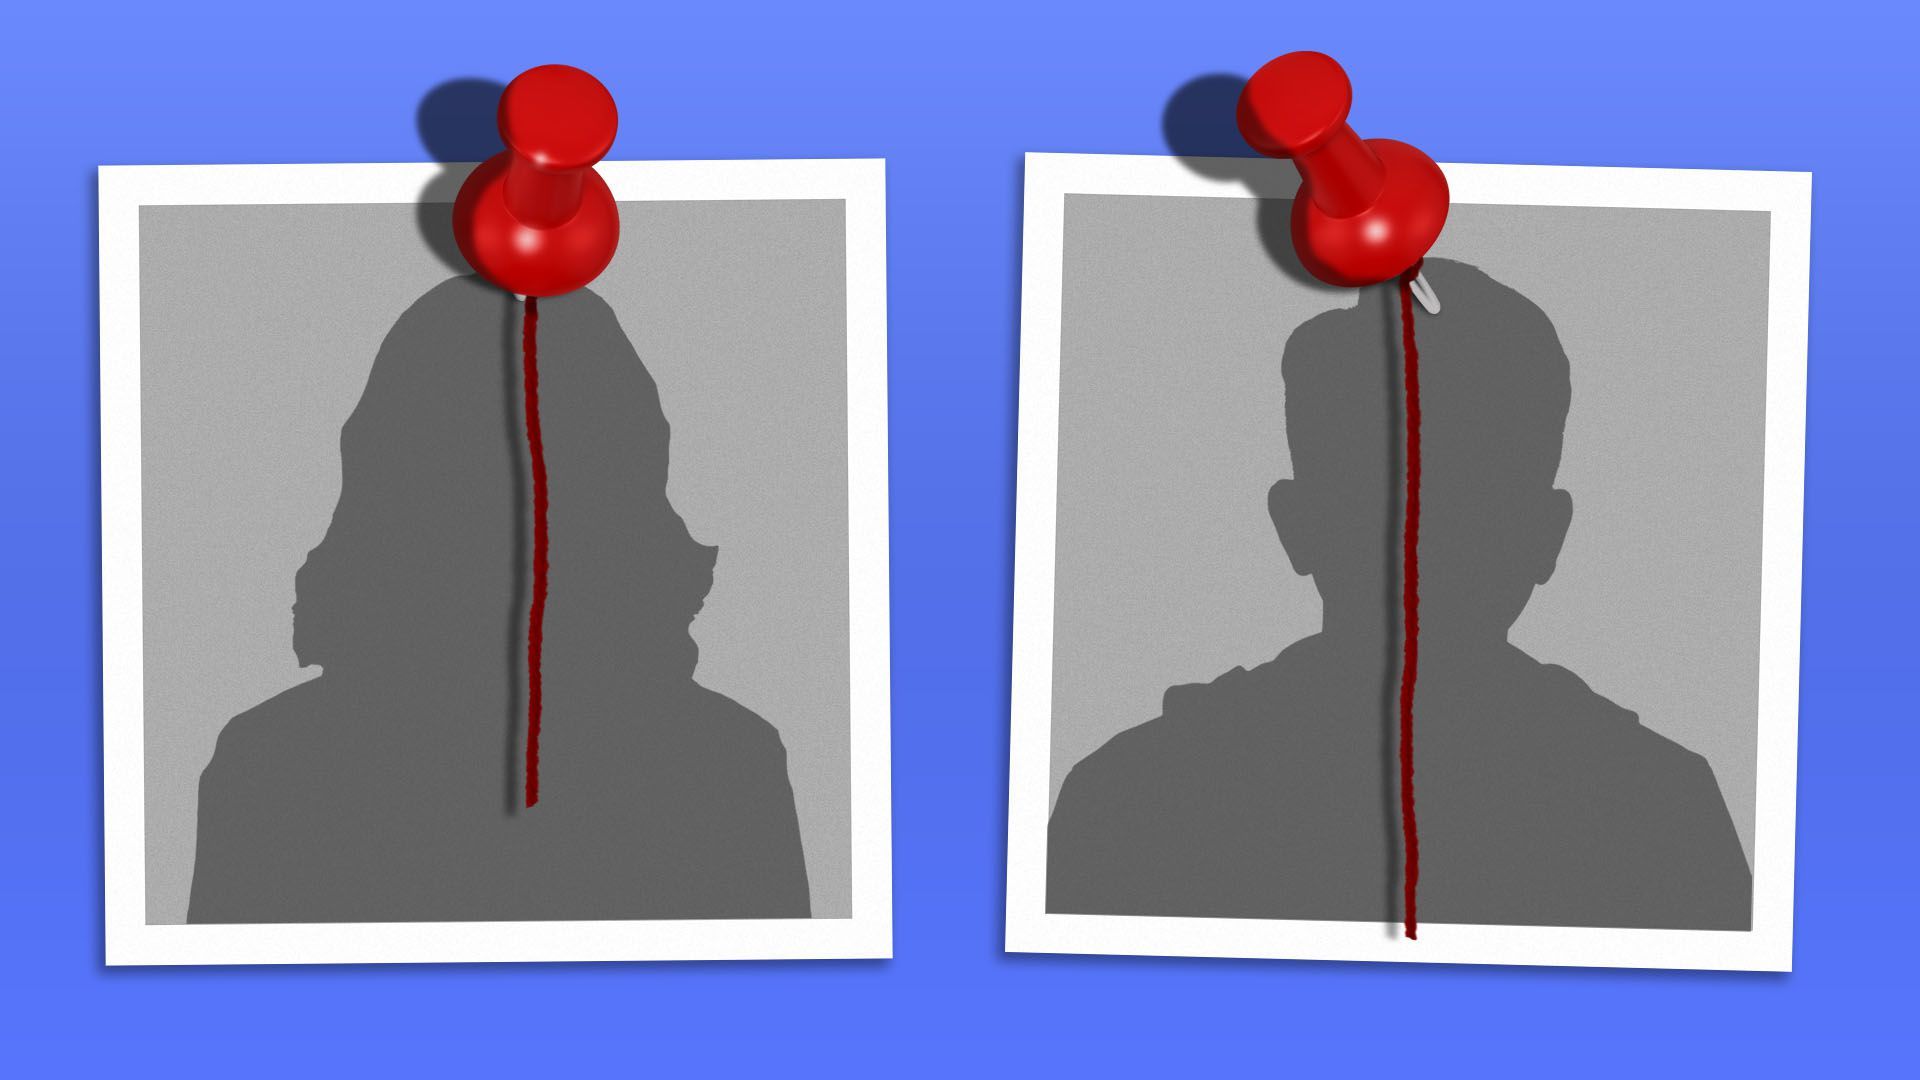 Illustration of two photographs of people in silhouette pinned to a wall with a broken string between them